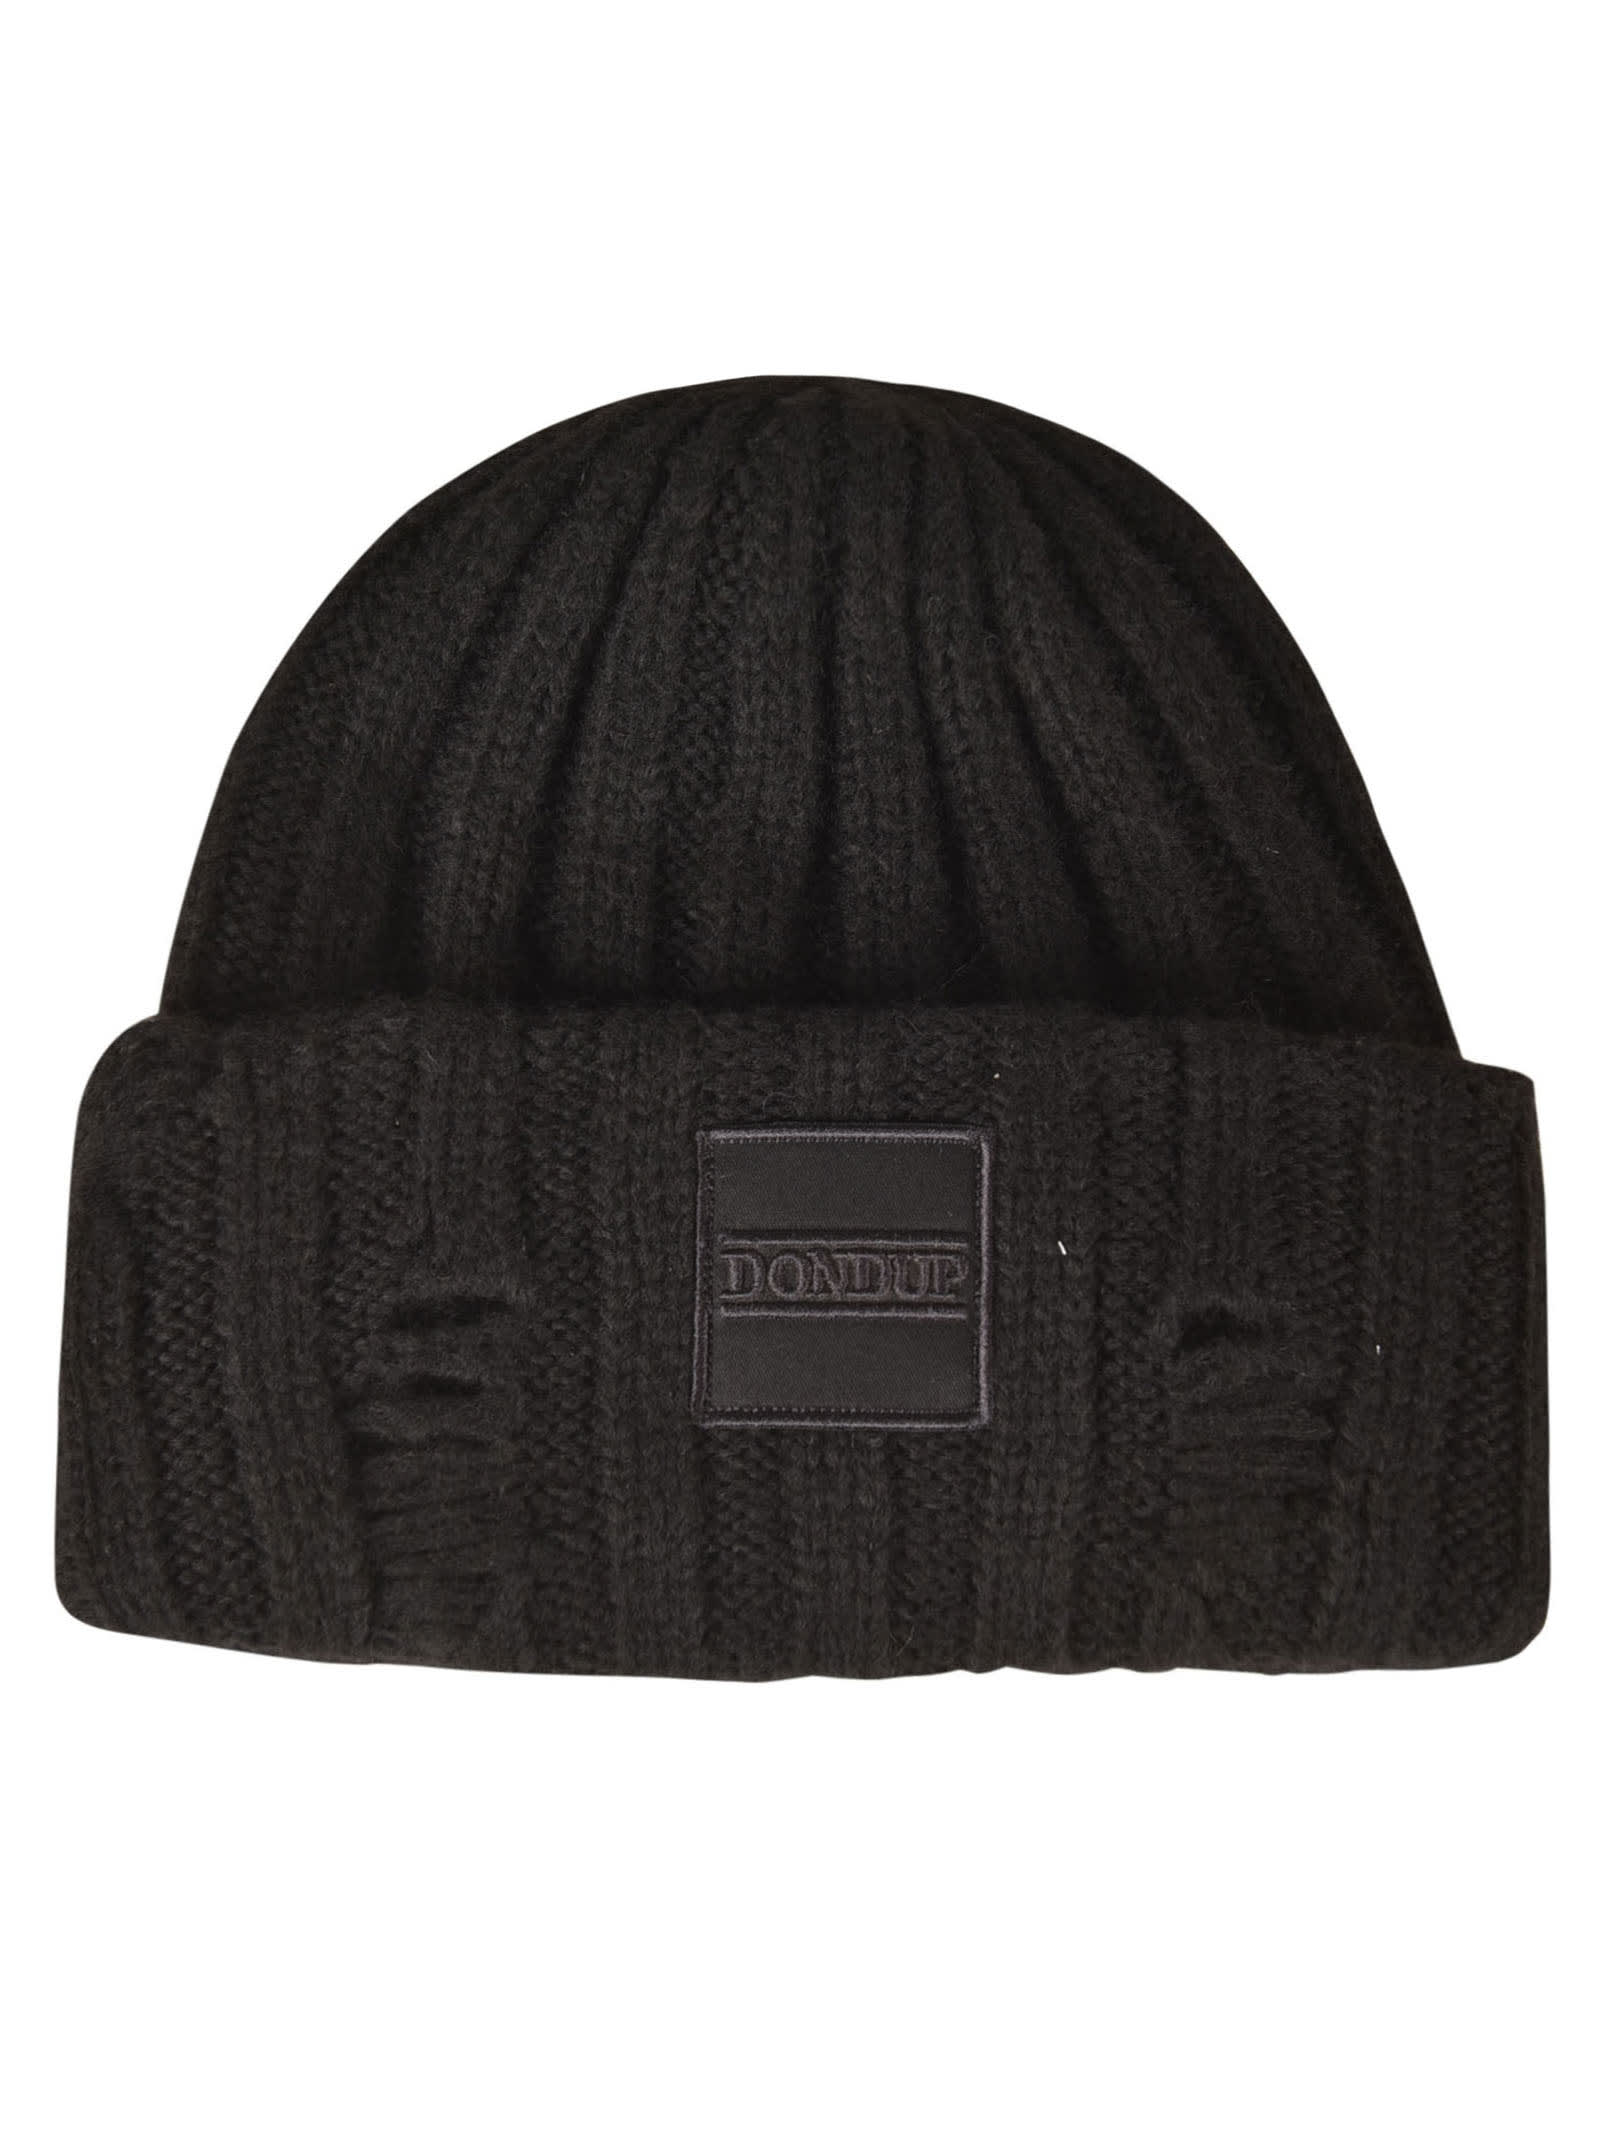 DONDUP LOGO PATCHED KNIT BEANIE